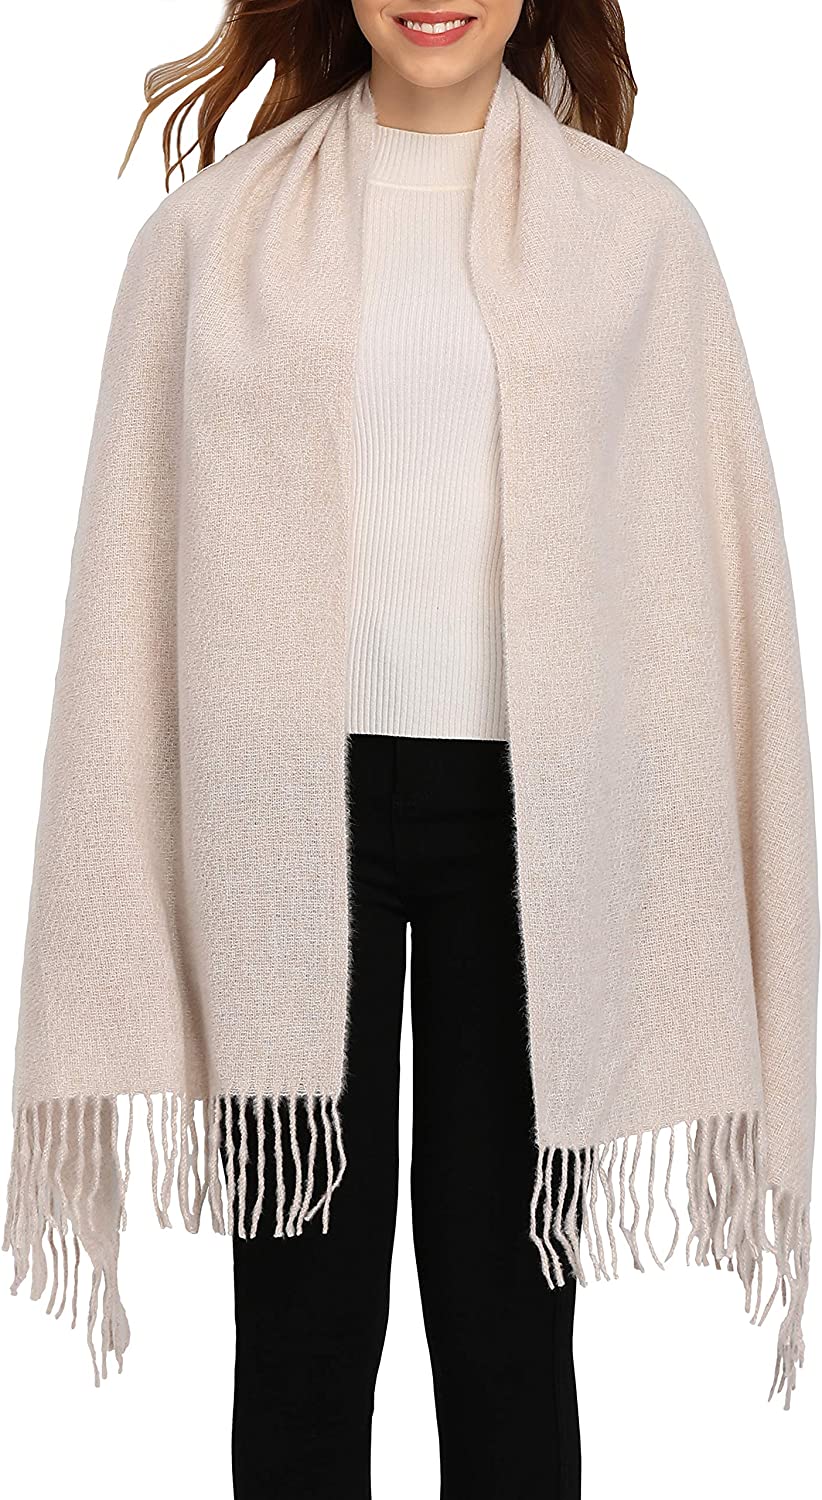 Women Men Winter Thick Cable Knit Wrap Chunky Warm Scarf